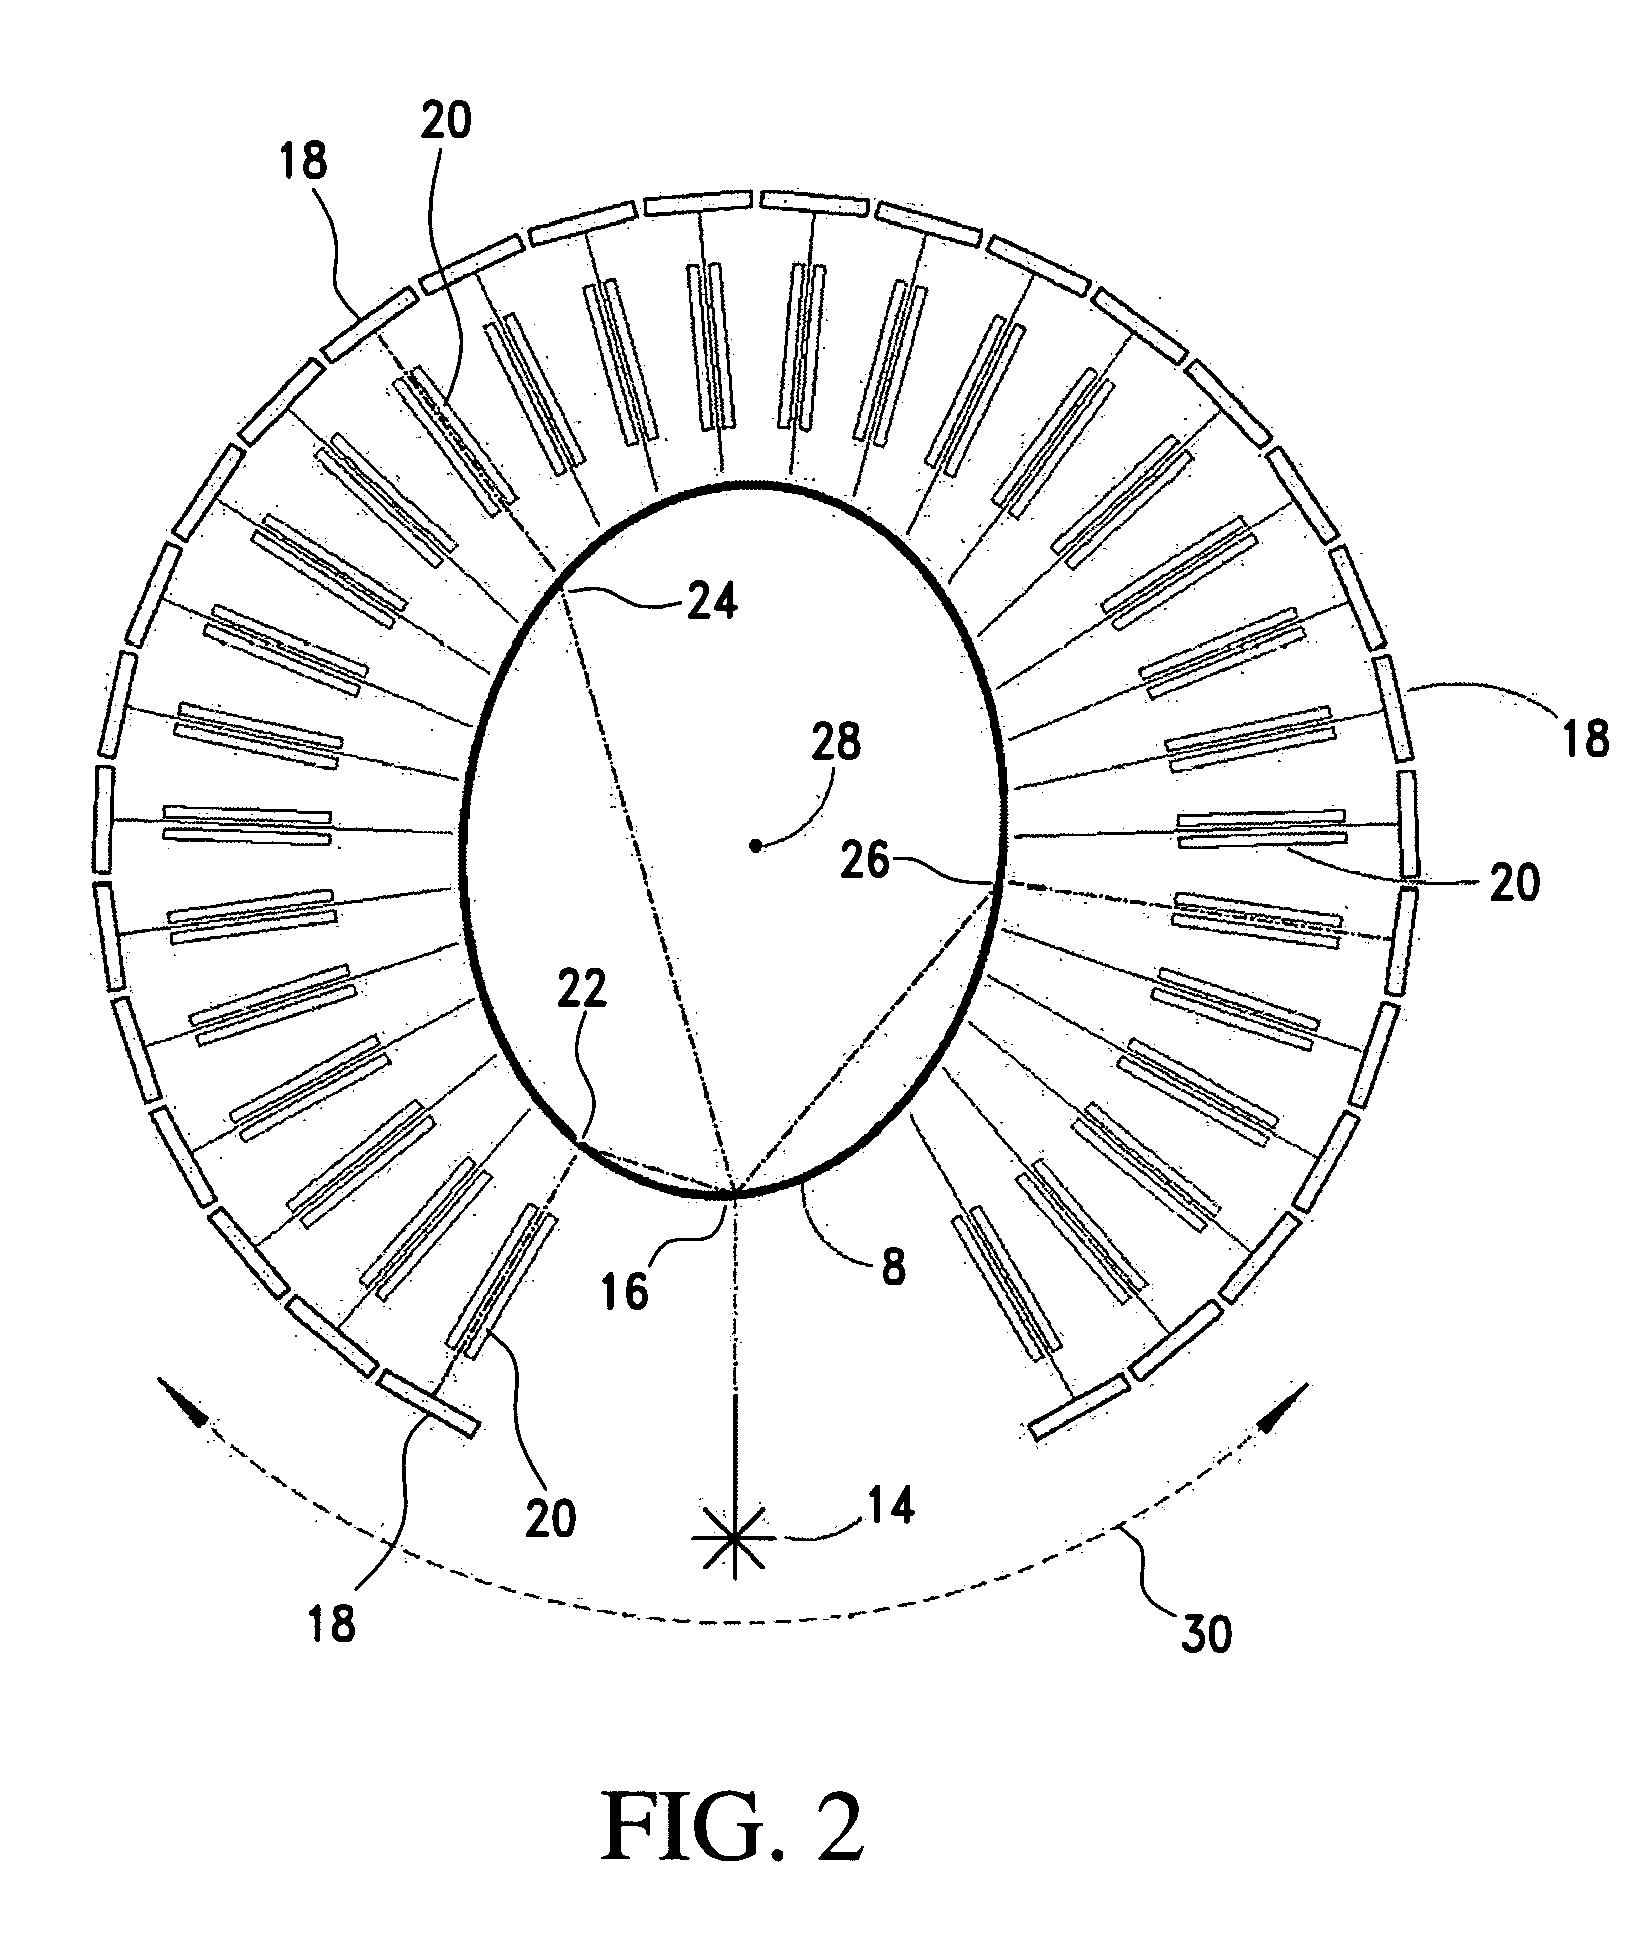 Laser imaging apparatus with variable patient positioning